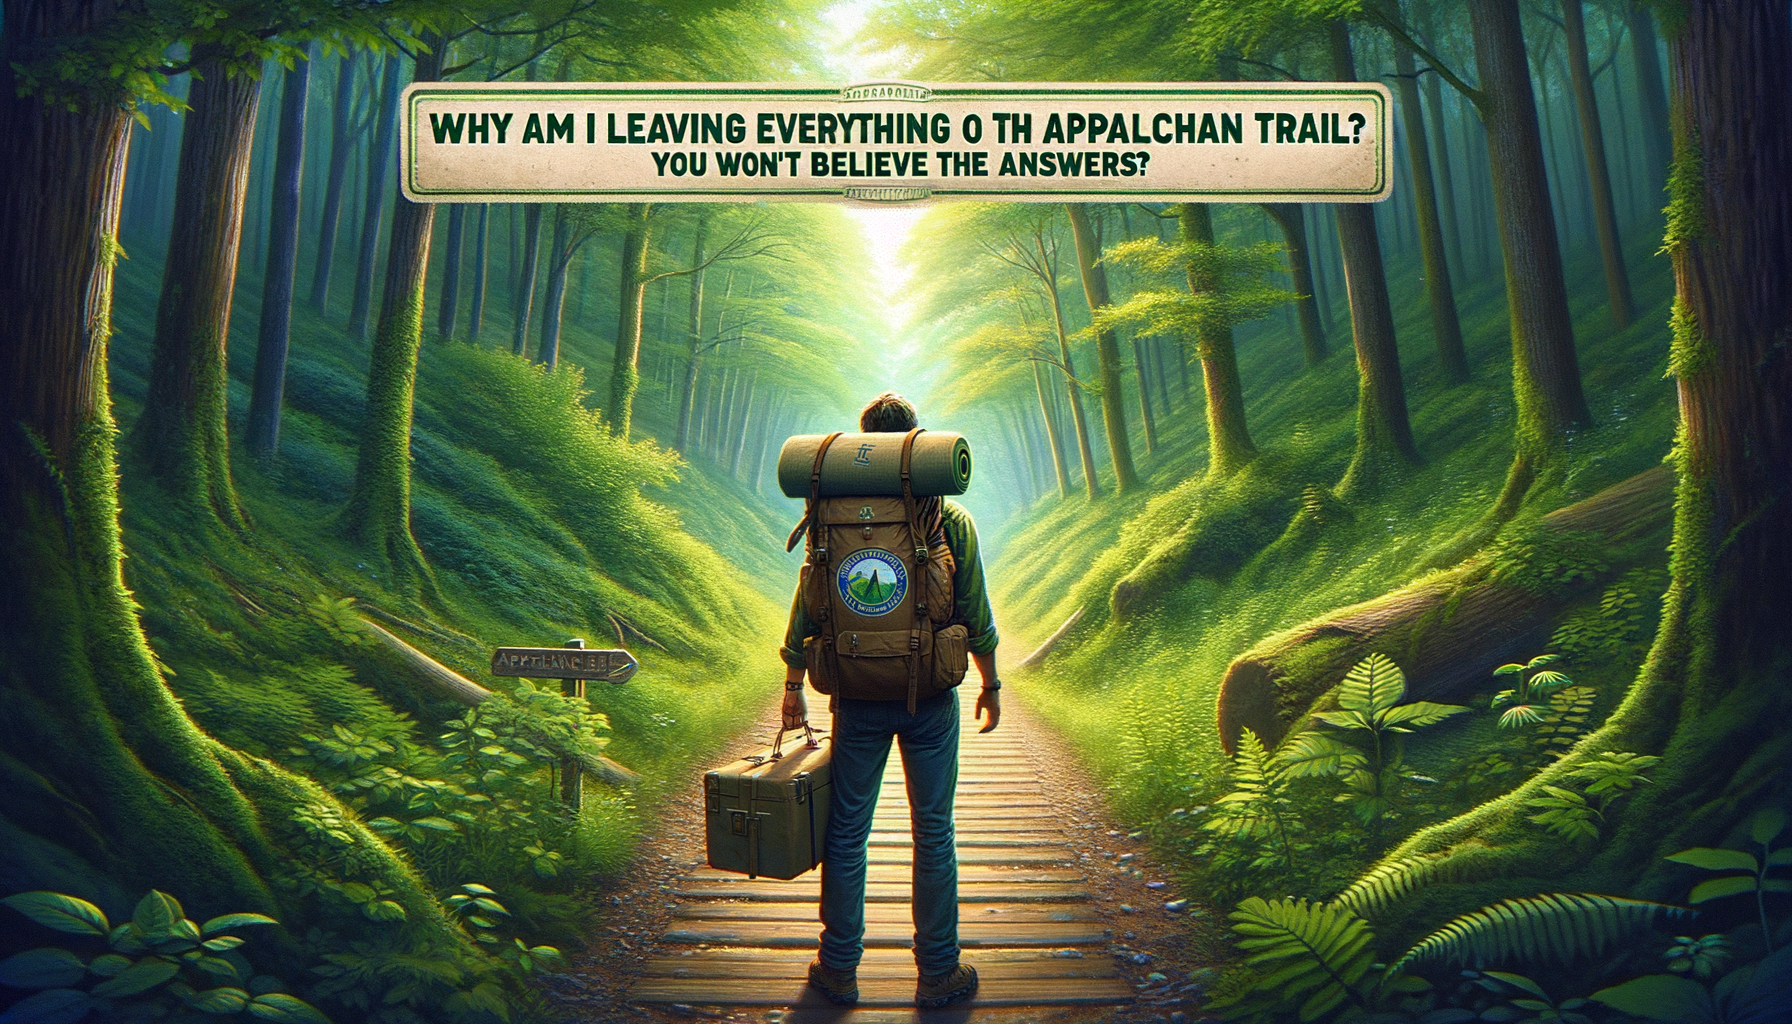 follow one hiker's journey as they leave everything behind to hike the appalachian trail, and find out the incredible reasons driving this decision that will leave you in disbelief!